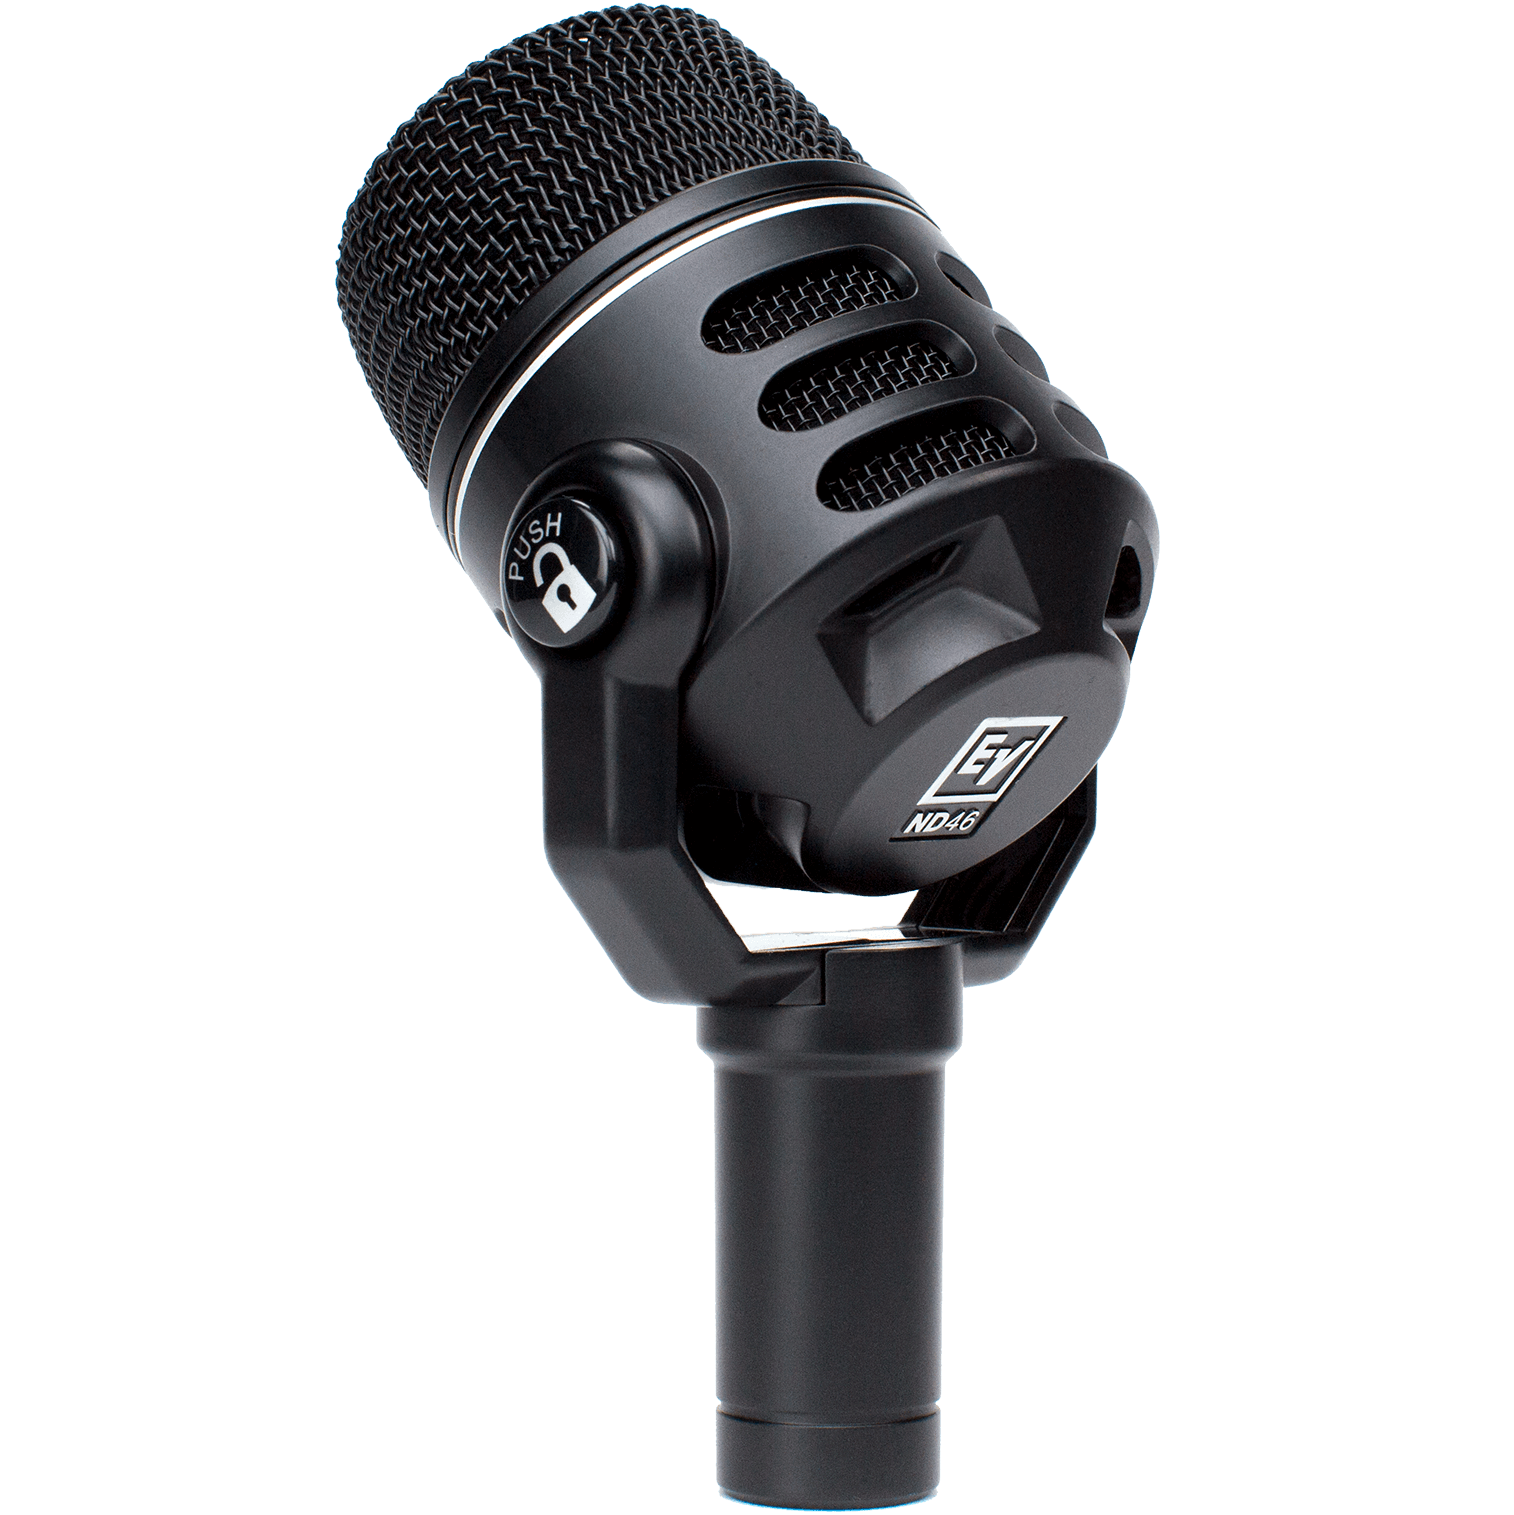 [REVIEW] Electro-Voice ND Series Microphones